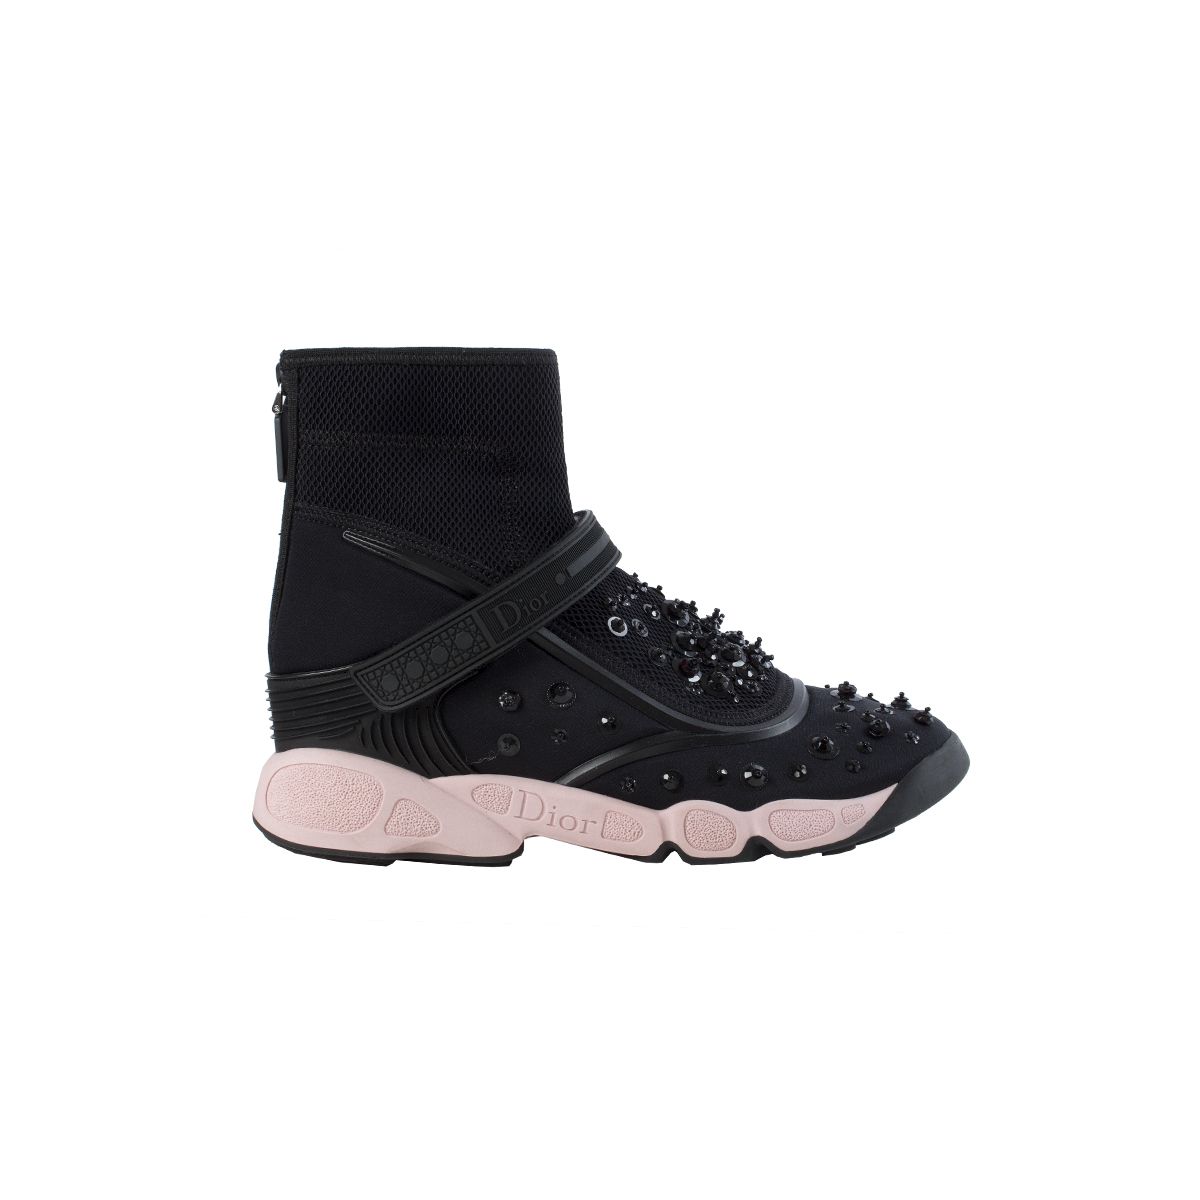 Christian Dior Fusion High-Top Sneakers